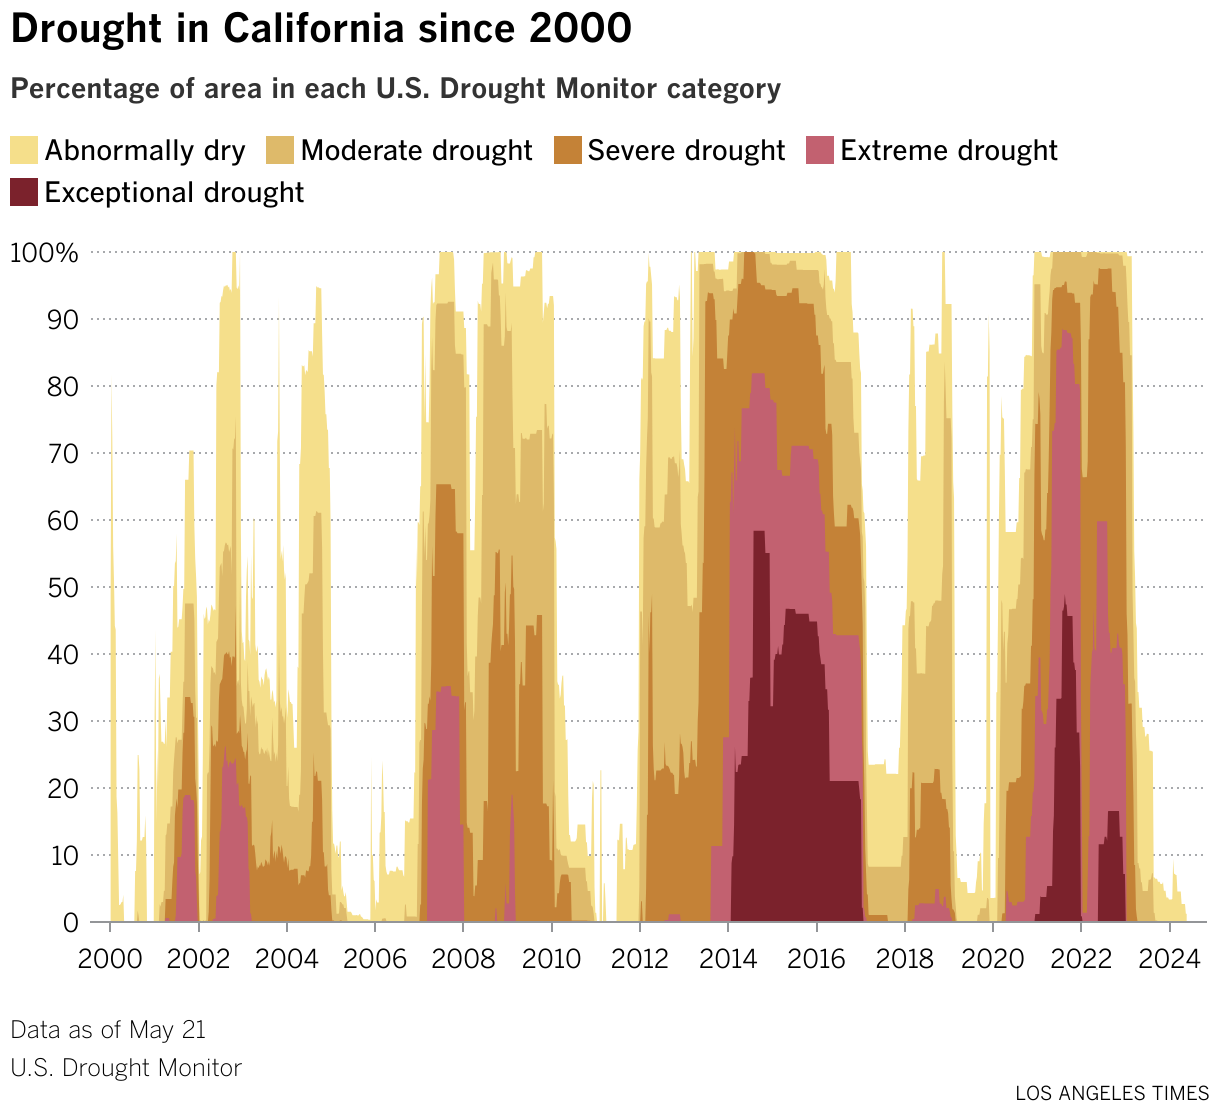 A layer chart shows the progression of drought conditions in California since 2000